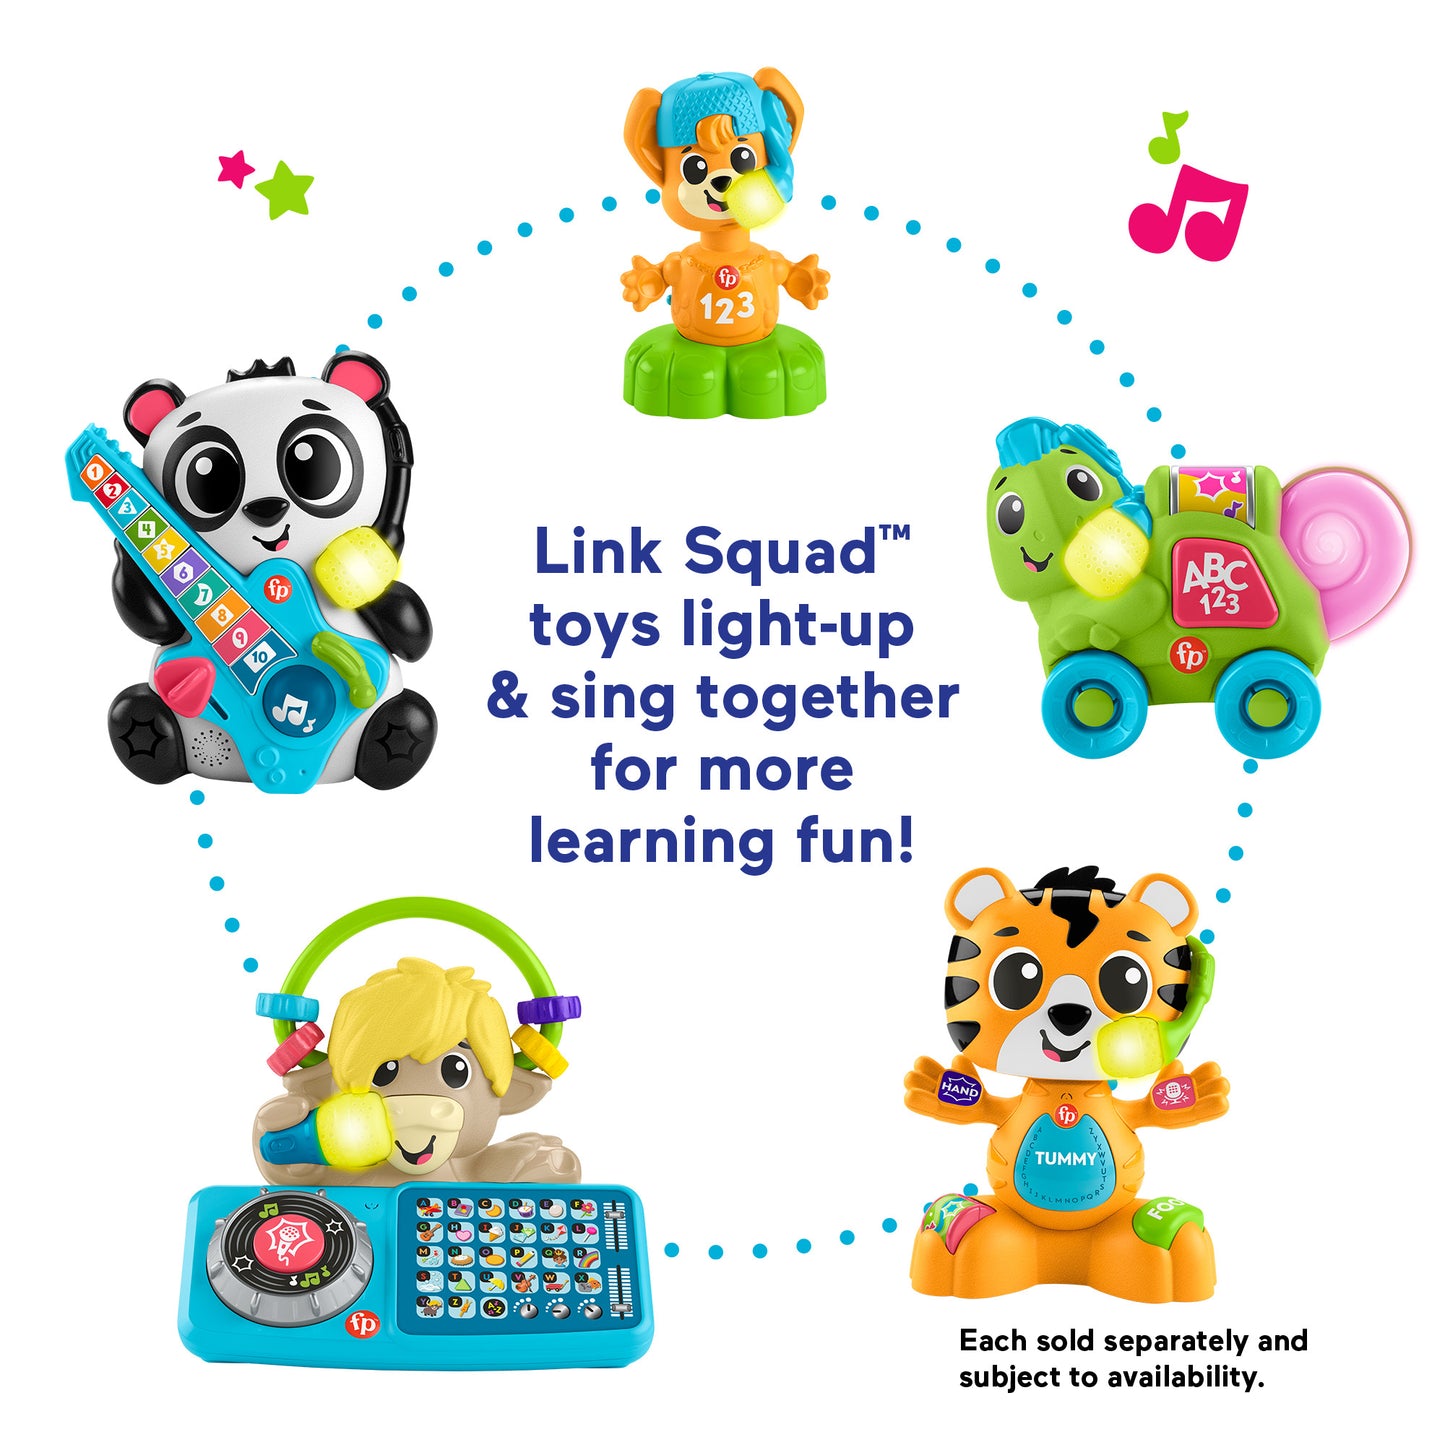 Fisher-Price Link Squad A to Z Yak